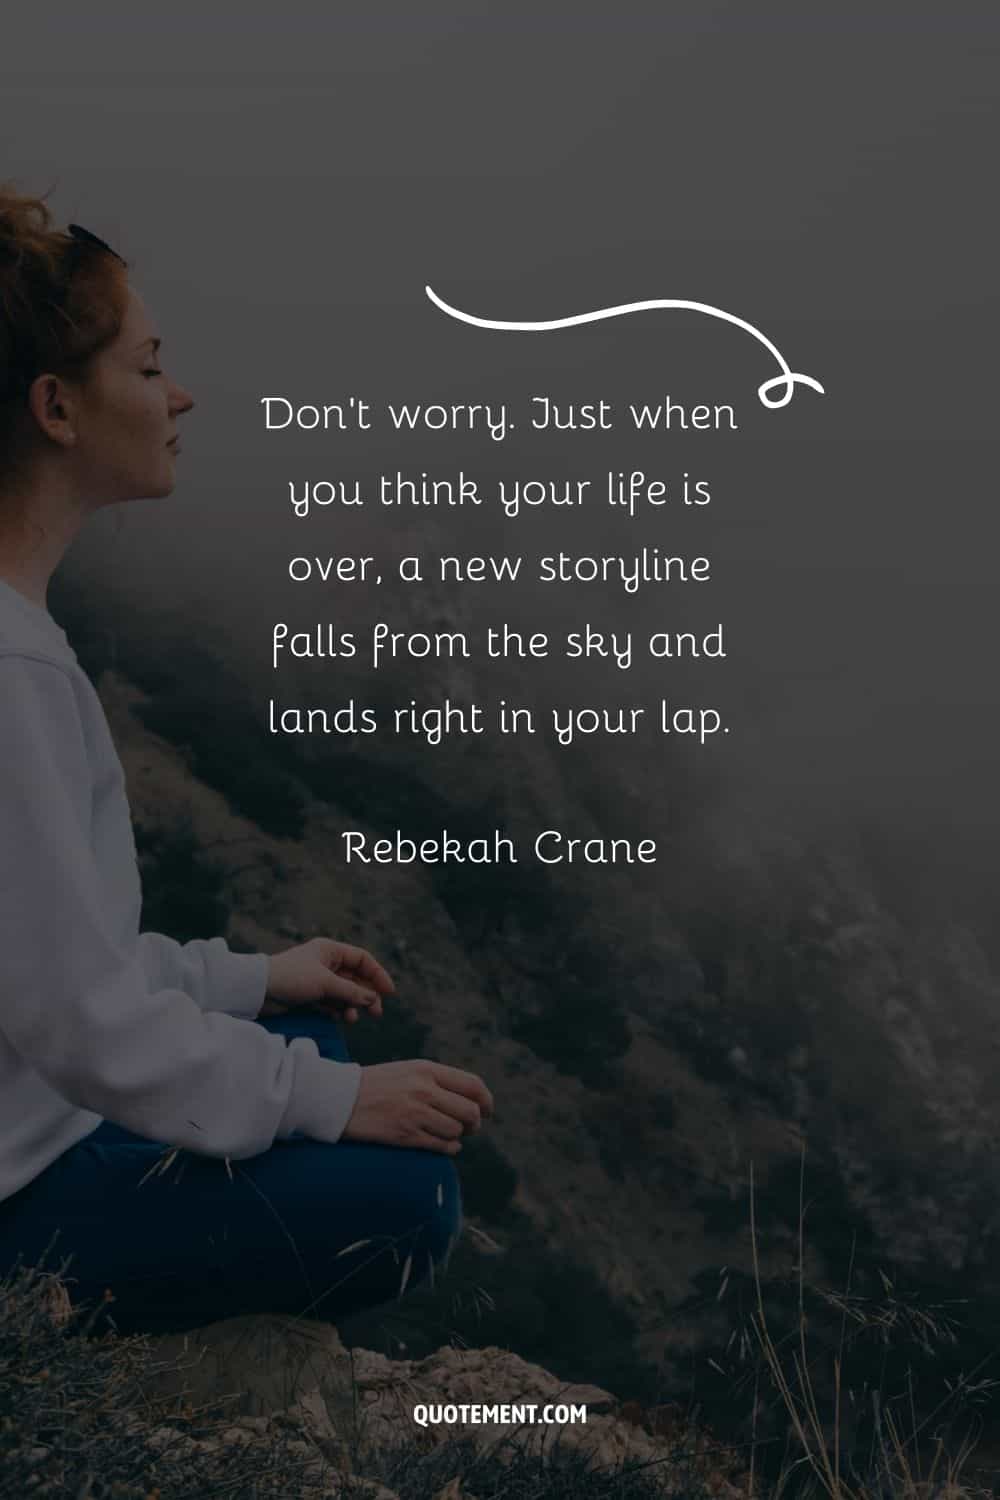 “Don’t worry. Just when you think your life is over, a new storyline falls from the sky and lands right in your lap.” — Rebekah Crane